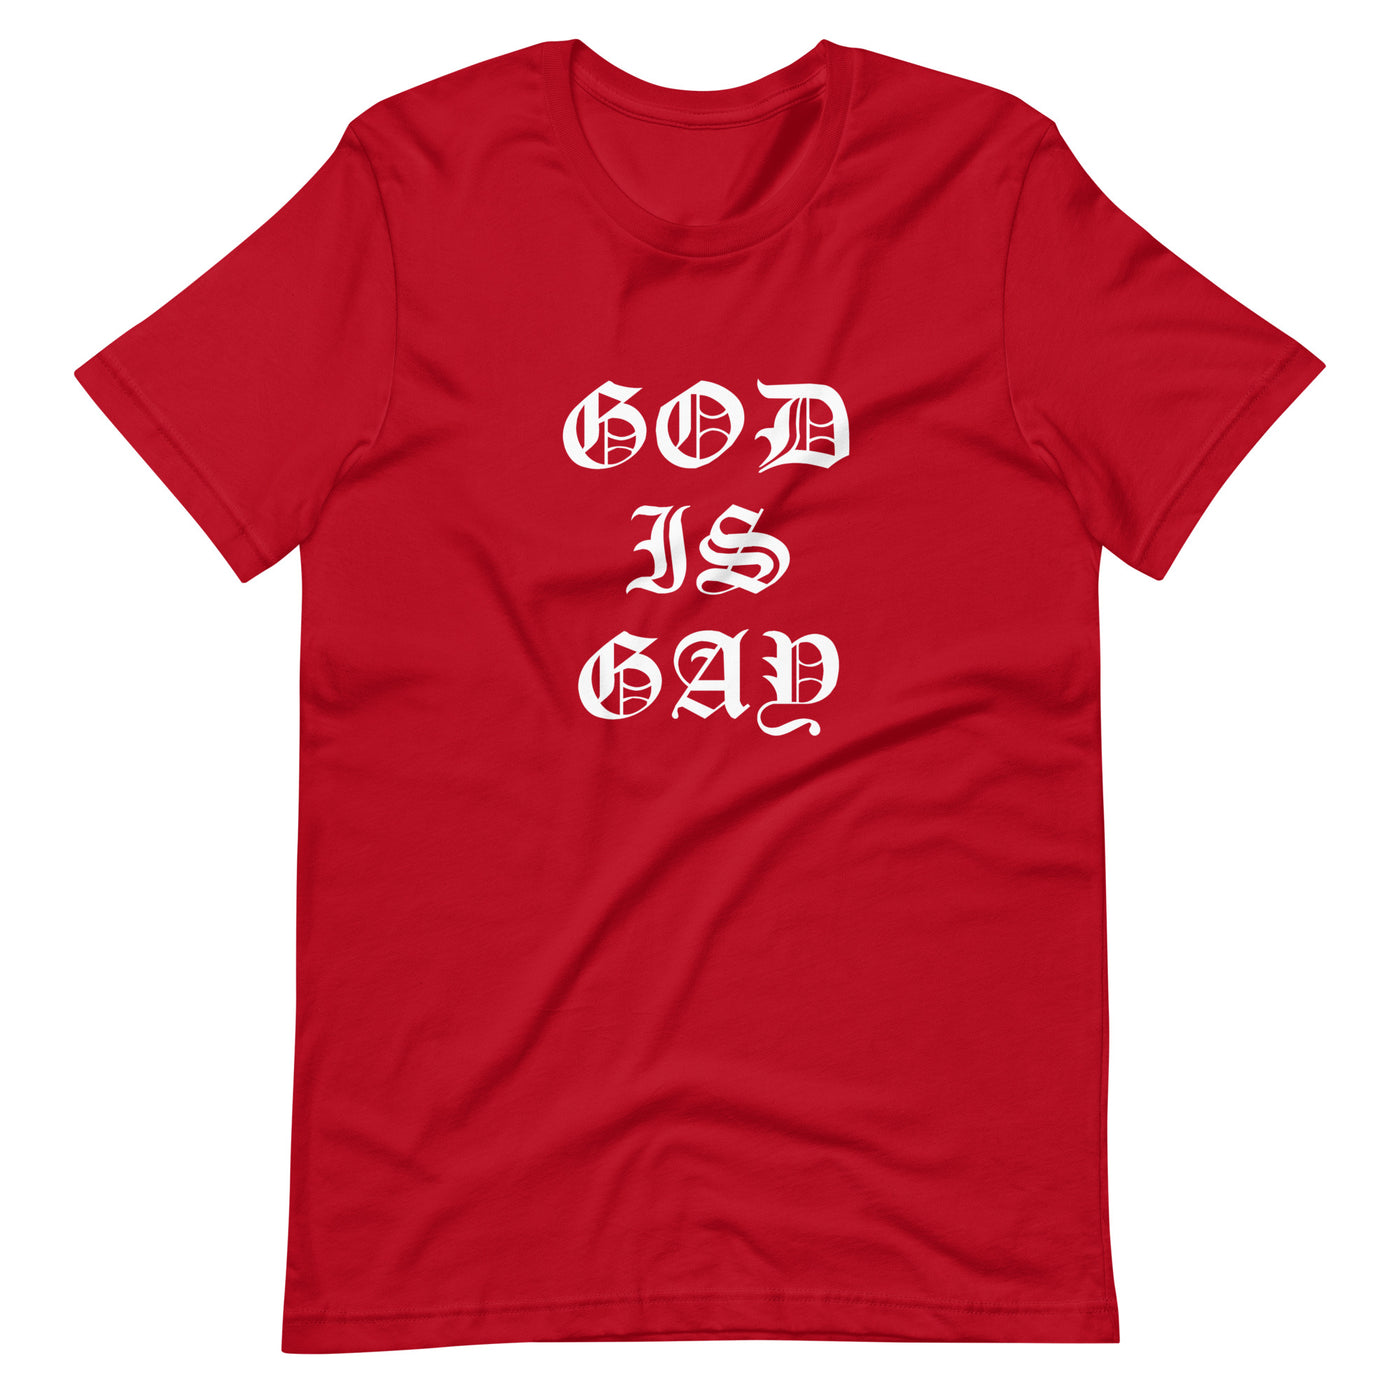 Pride Clothes - Ancient & Powerful Our God Is Gay Pride Merch T-Shirt - Red